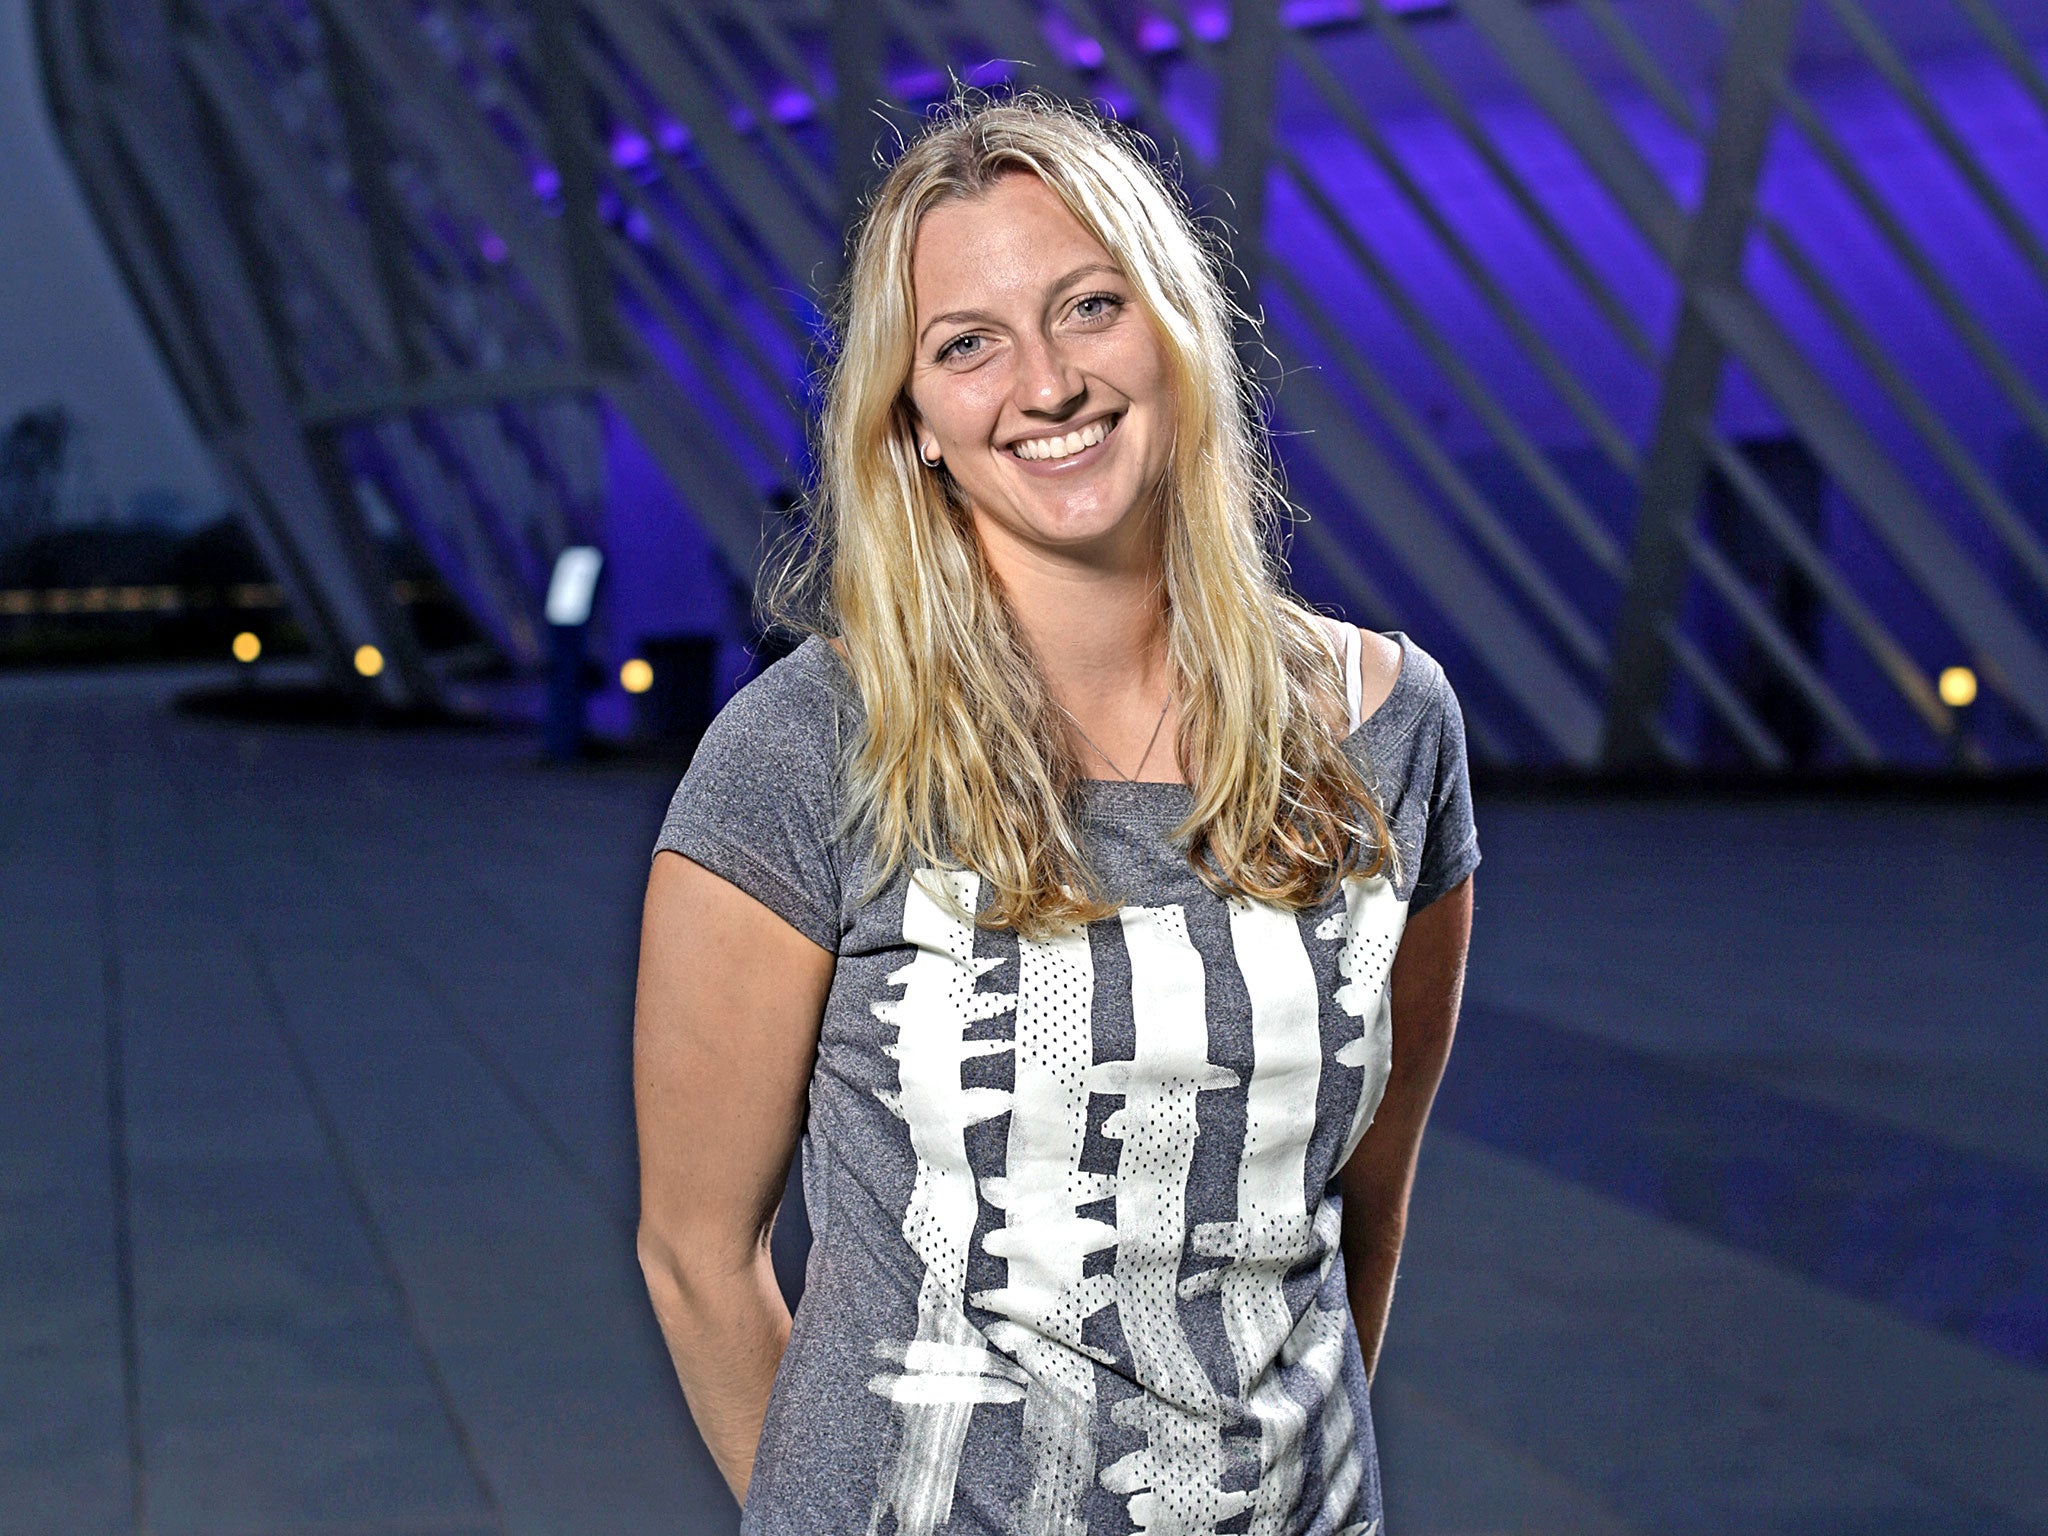 Wimbledon winner Petra Kvitova learns to live with her celebrity status The Independent The Independent